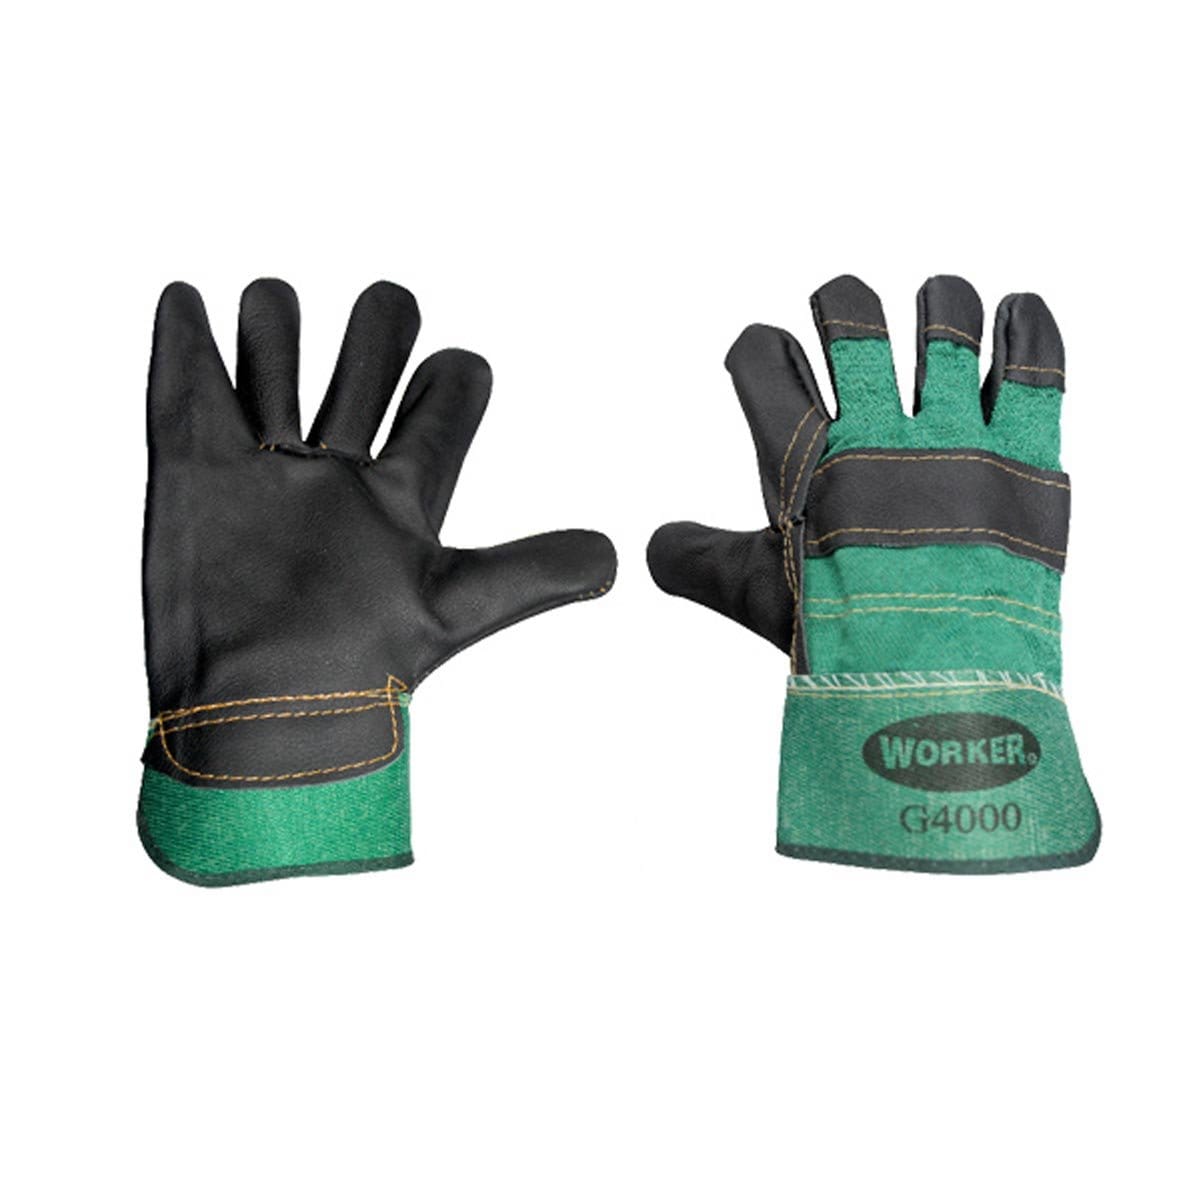 WORKER Furniture Leather Gloves G4000